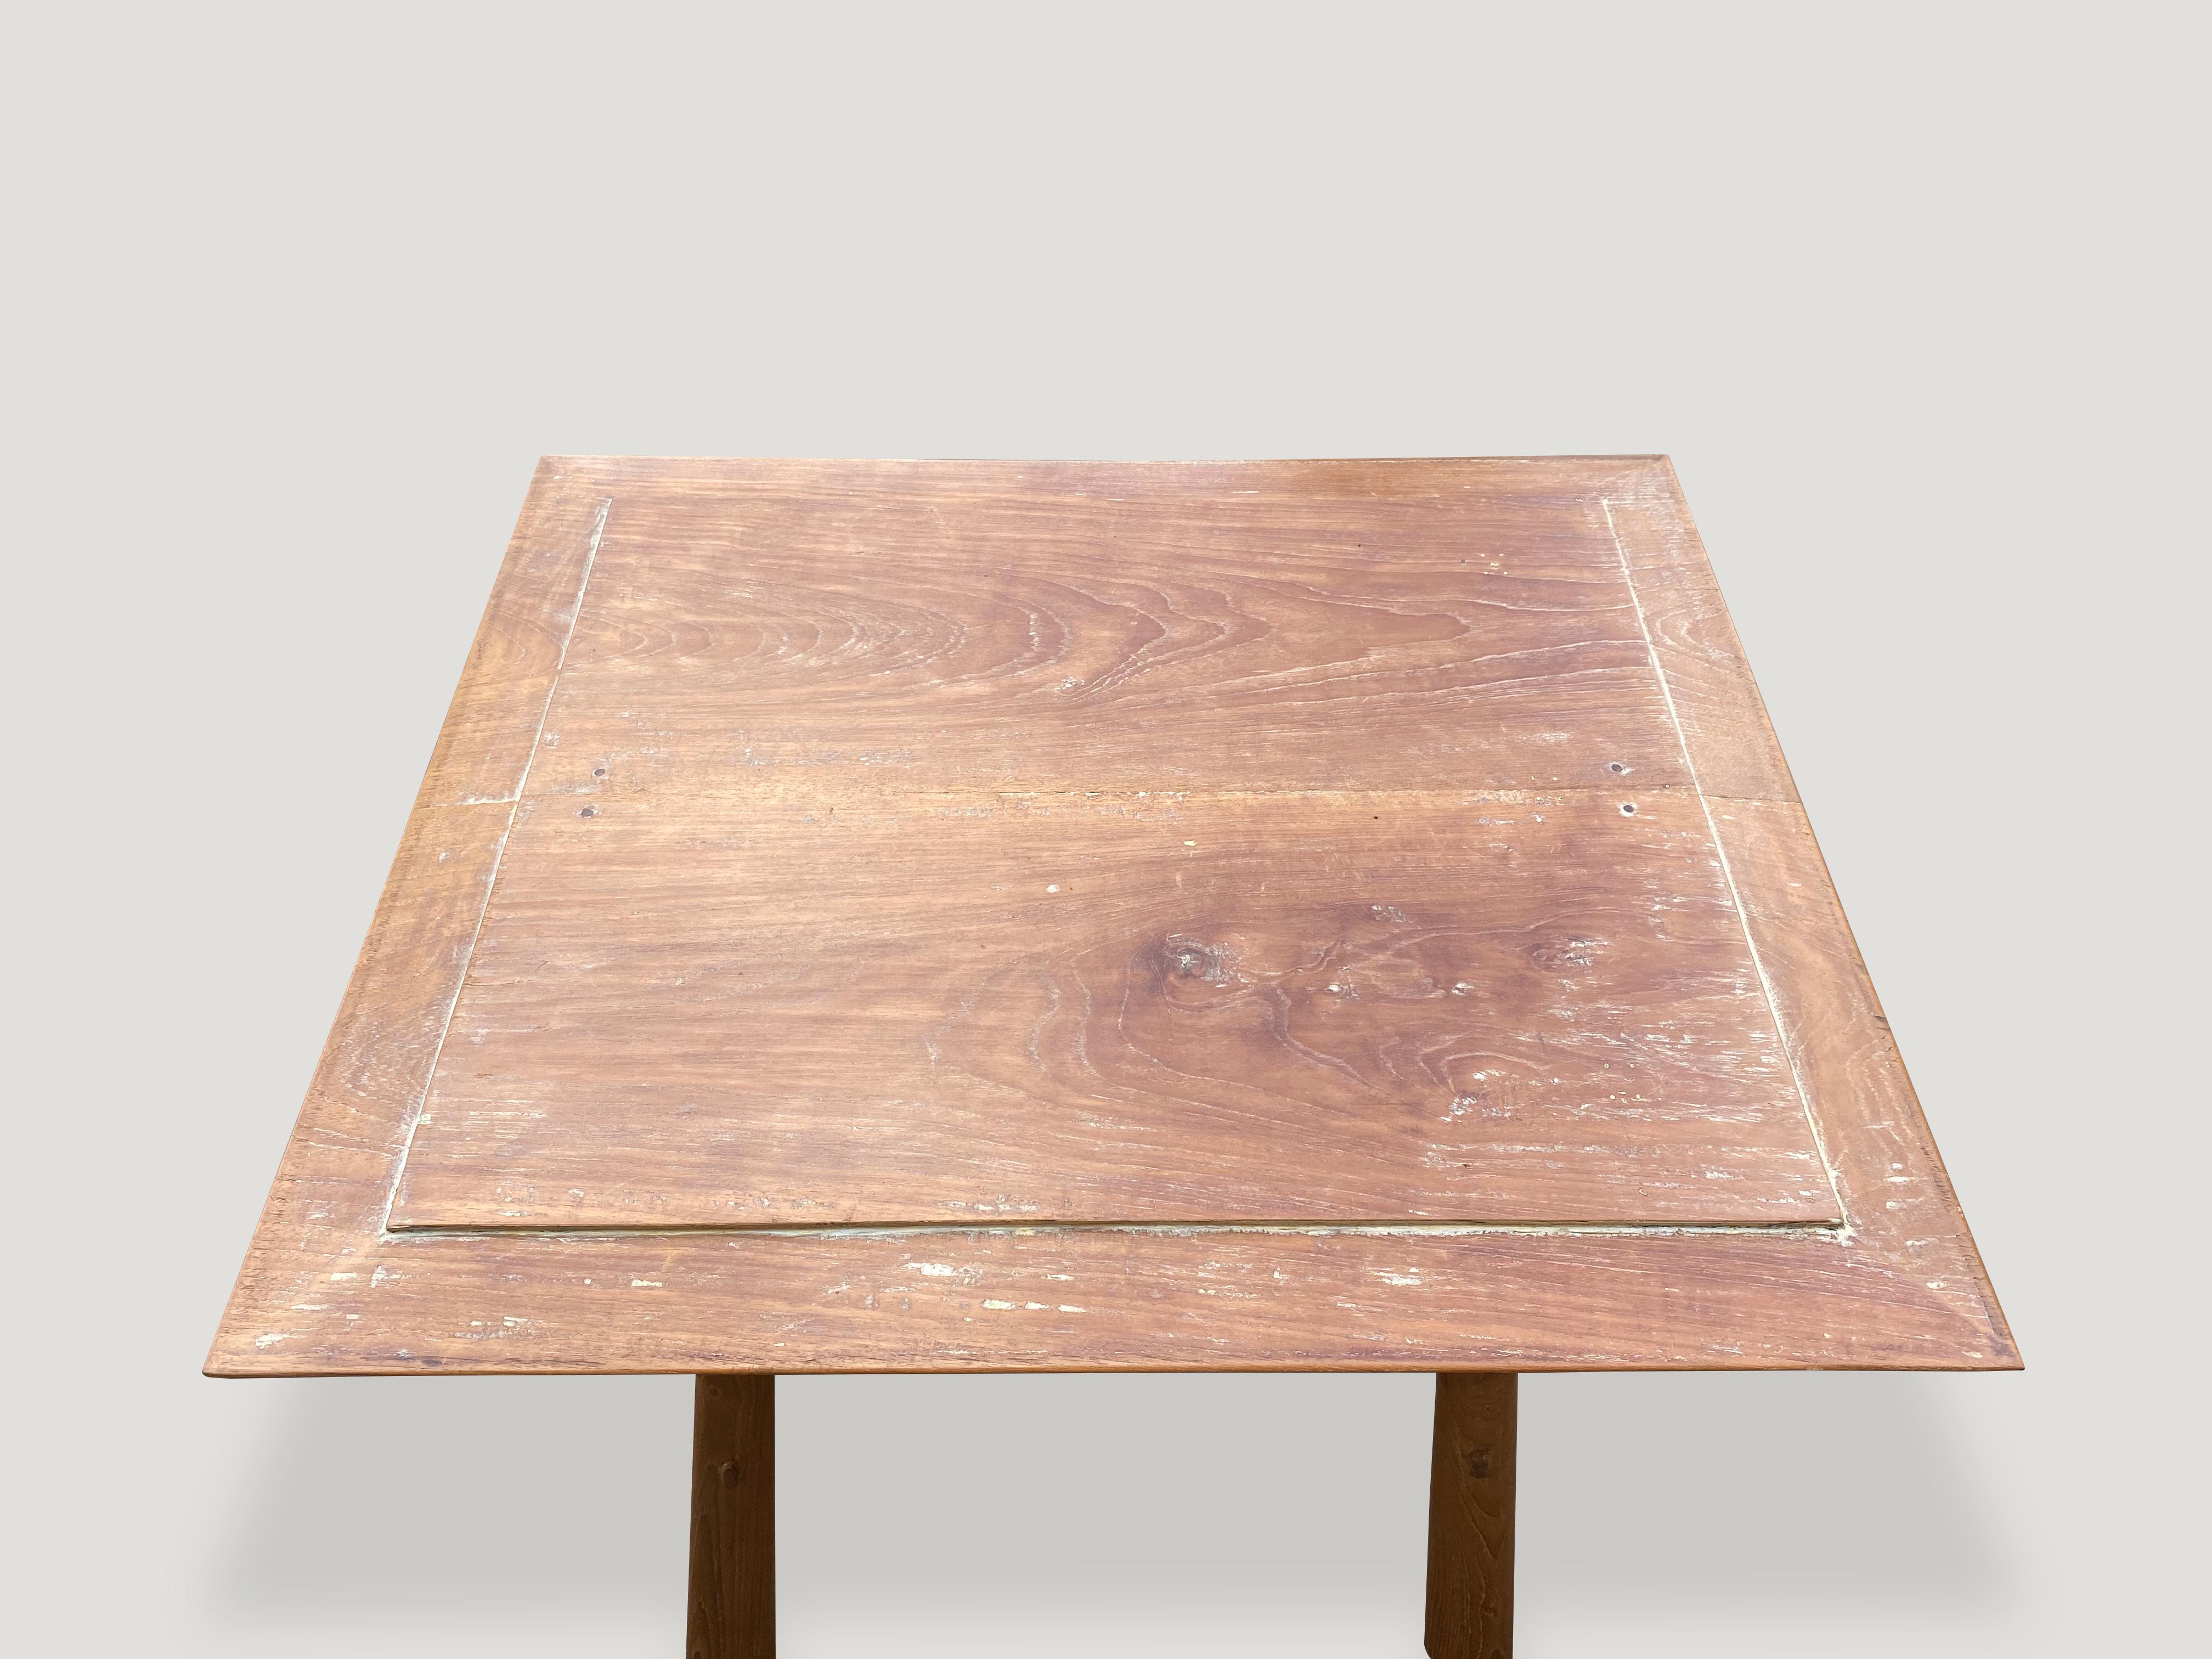 Andrianna Shamaris Midcentury Couture Teak Wood Cocktail Table or Entry Table In Excellent Condition For Sale In New York, NY